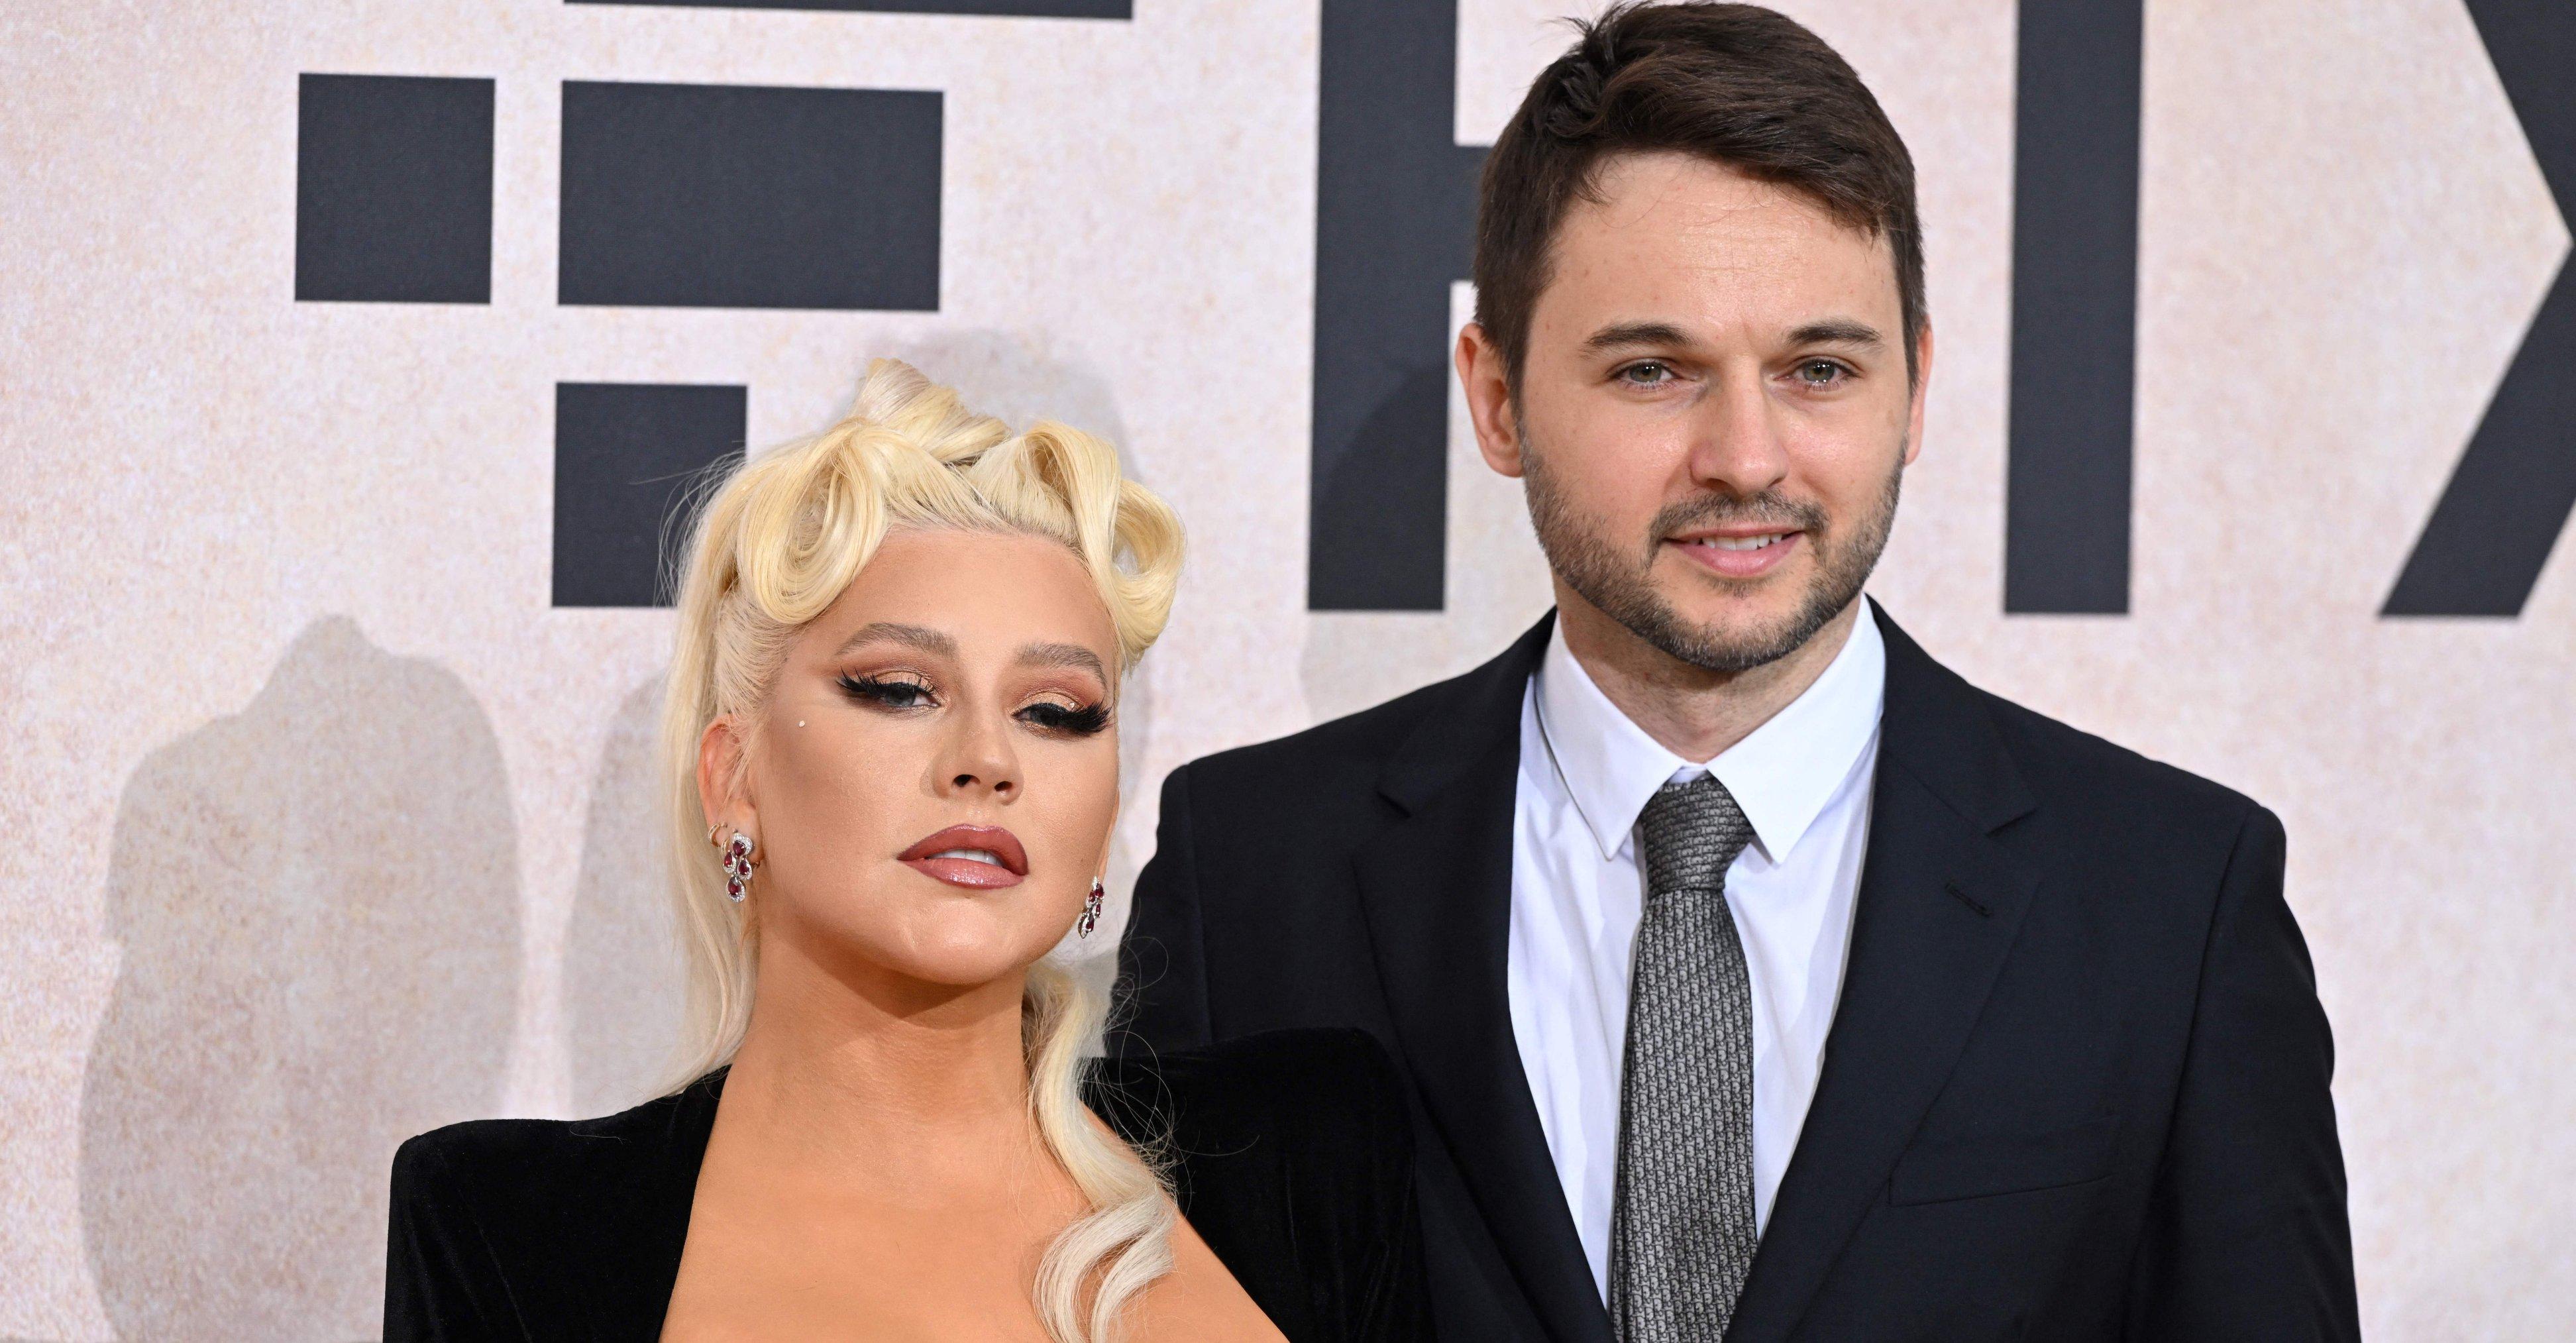 Christina Aguilera and Matthew Rutler at the amfAR Cinema Against AIDS Cannes Gala on May 26, 2022